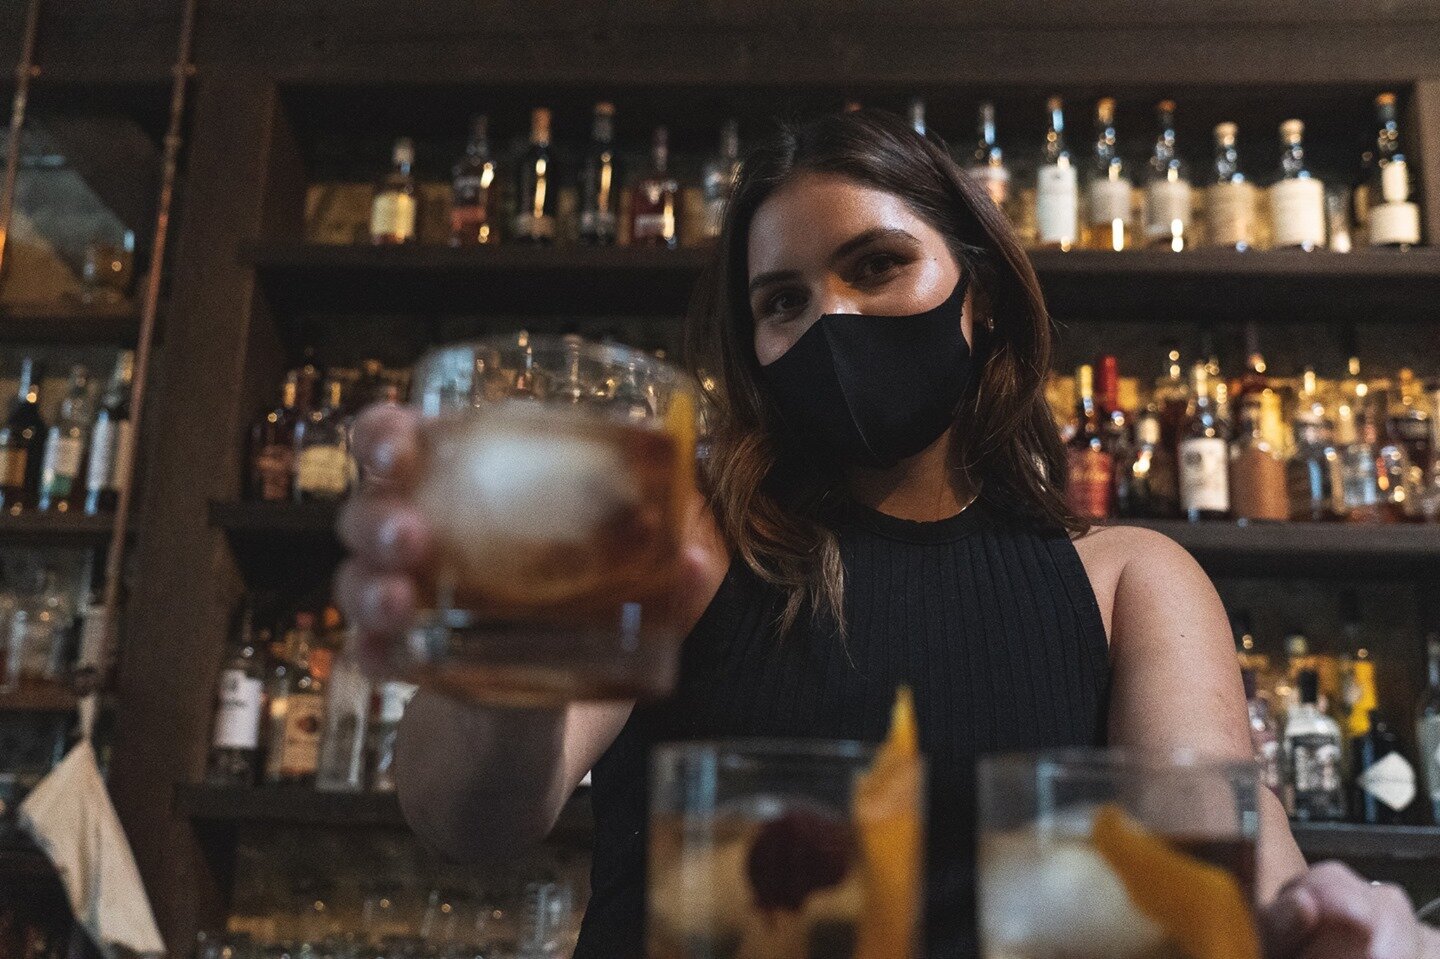 You look like you could use a break this afternoon!  How bout a quality Old Fashioned, only $5 on our happy hour menu today from 4-6pm.  See you here?